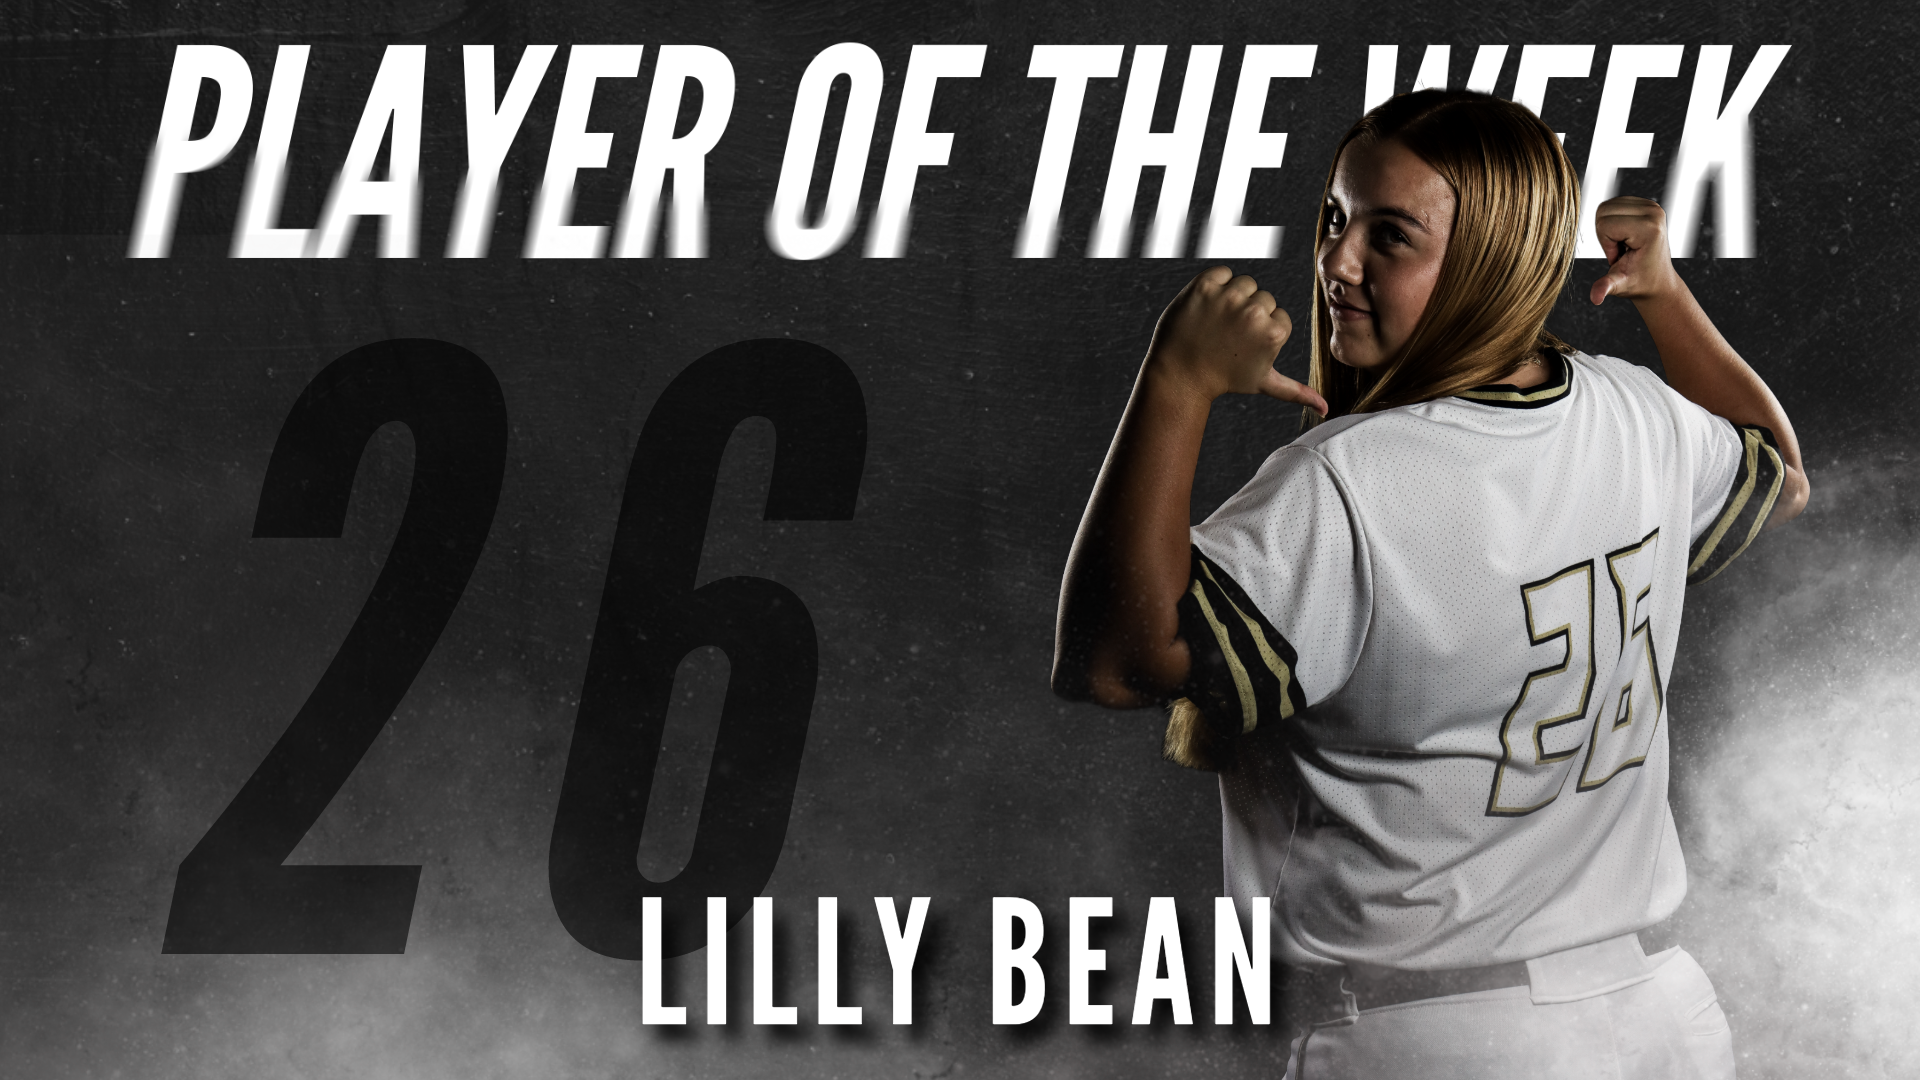 Bean named player of the week